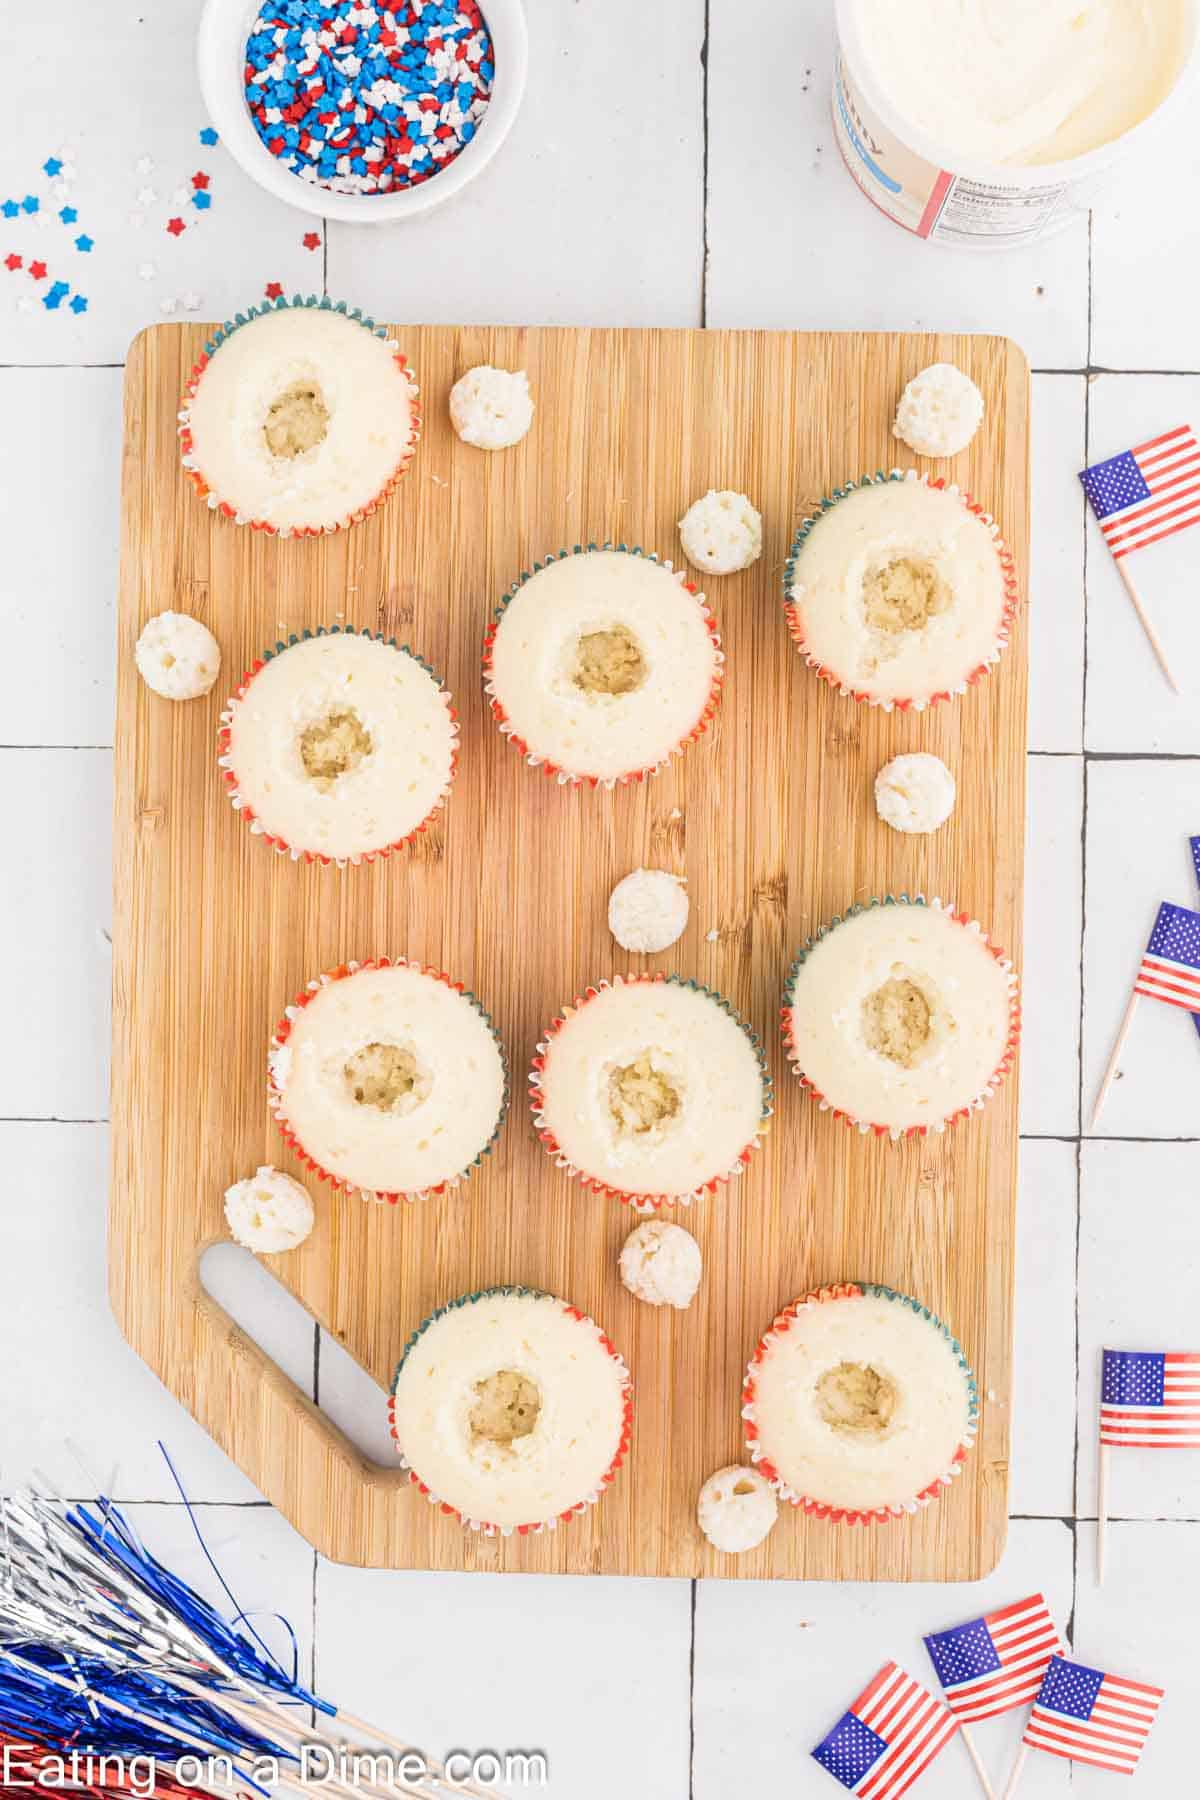 A wooden board displays nine Firecracker Cupcakes with holes cut in the center. A small knife rests on the board. Surrounding the board are a container of white frosting, a bowl of blue, white, and red sprinkles, mini American flags, and patriotic decorations.